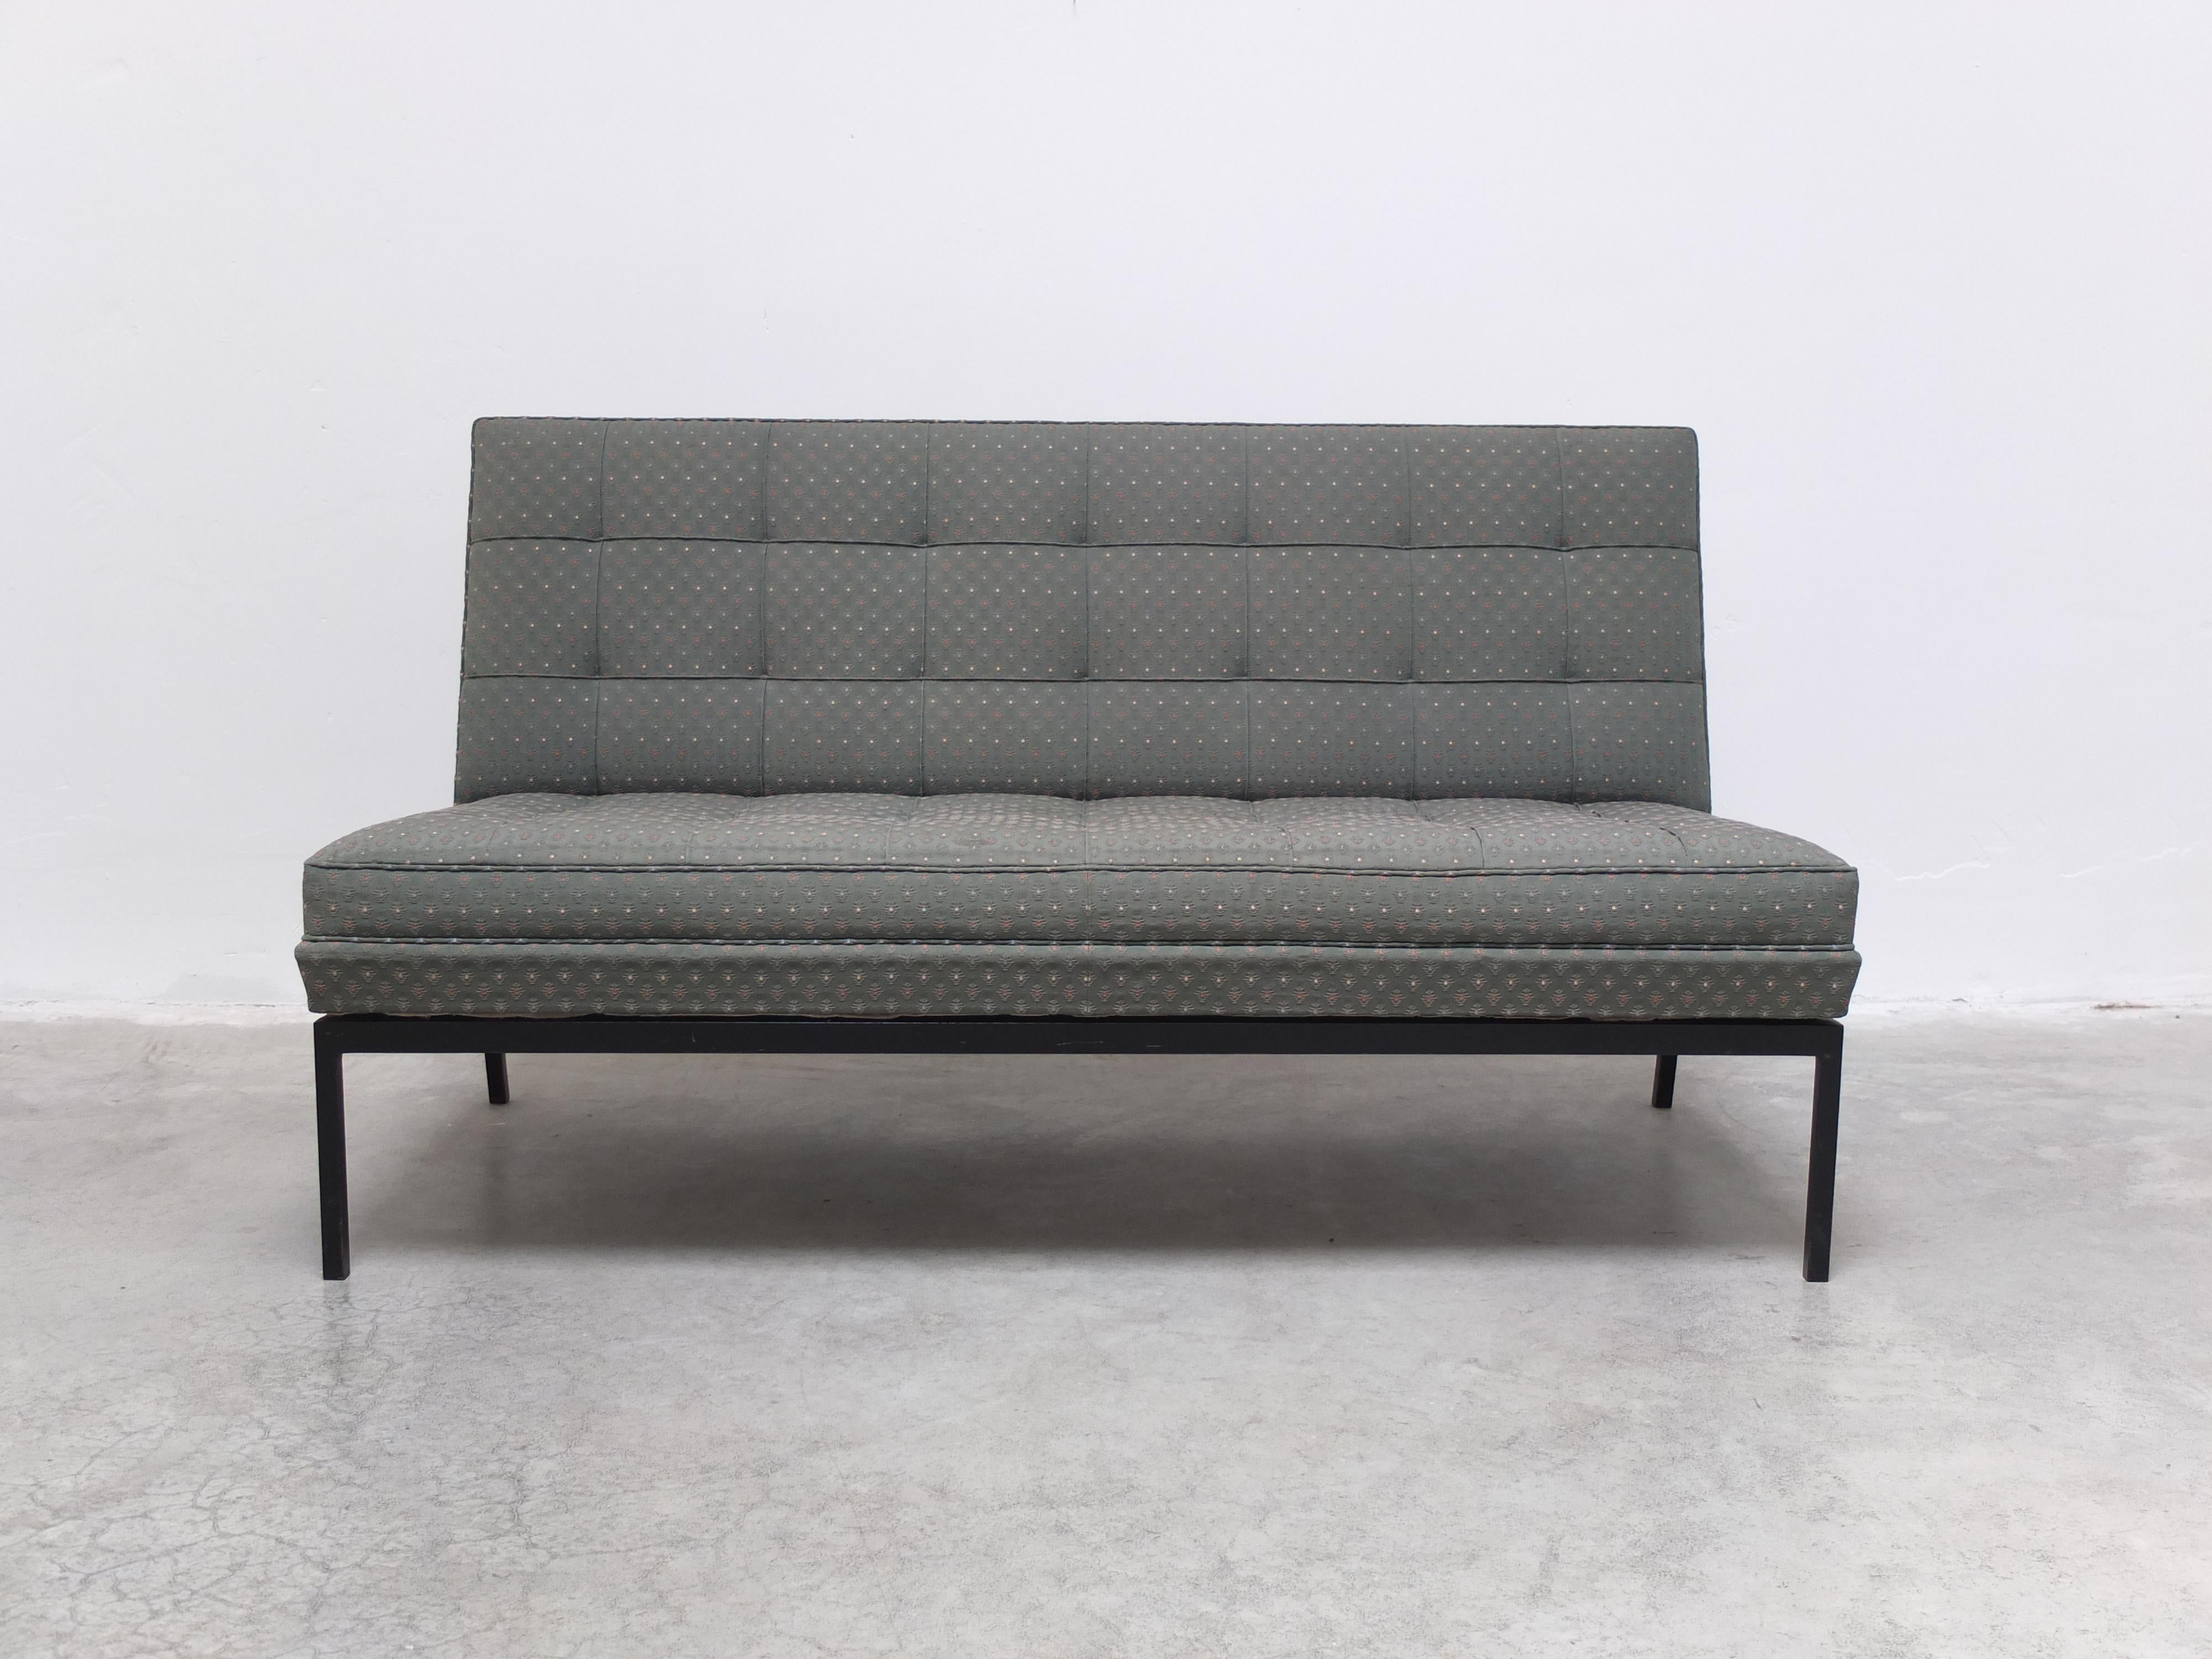 Rare 2-seater sofa designed by Florence Knoll Basset around 1955. This armless version is called ‘Model 66’ or ‘Slipper’ and features a slim black lacquered base in steel with a funky fabric on top. This sofa comes from a fancy accounting office in